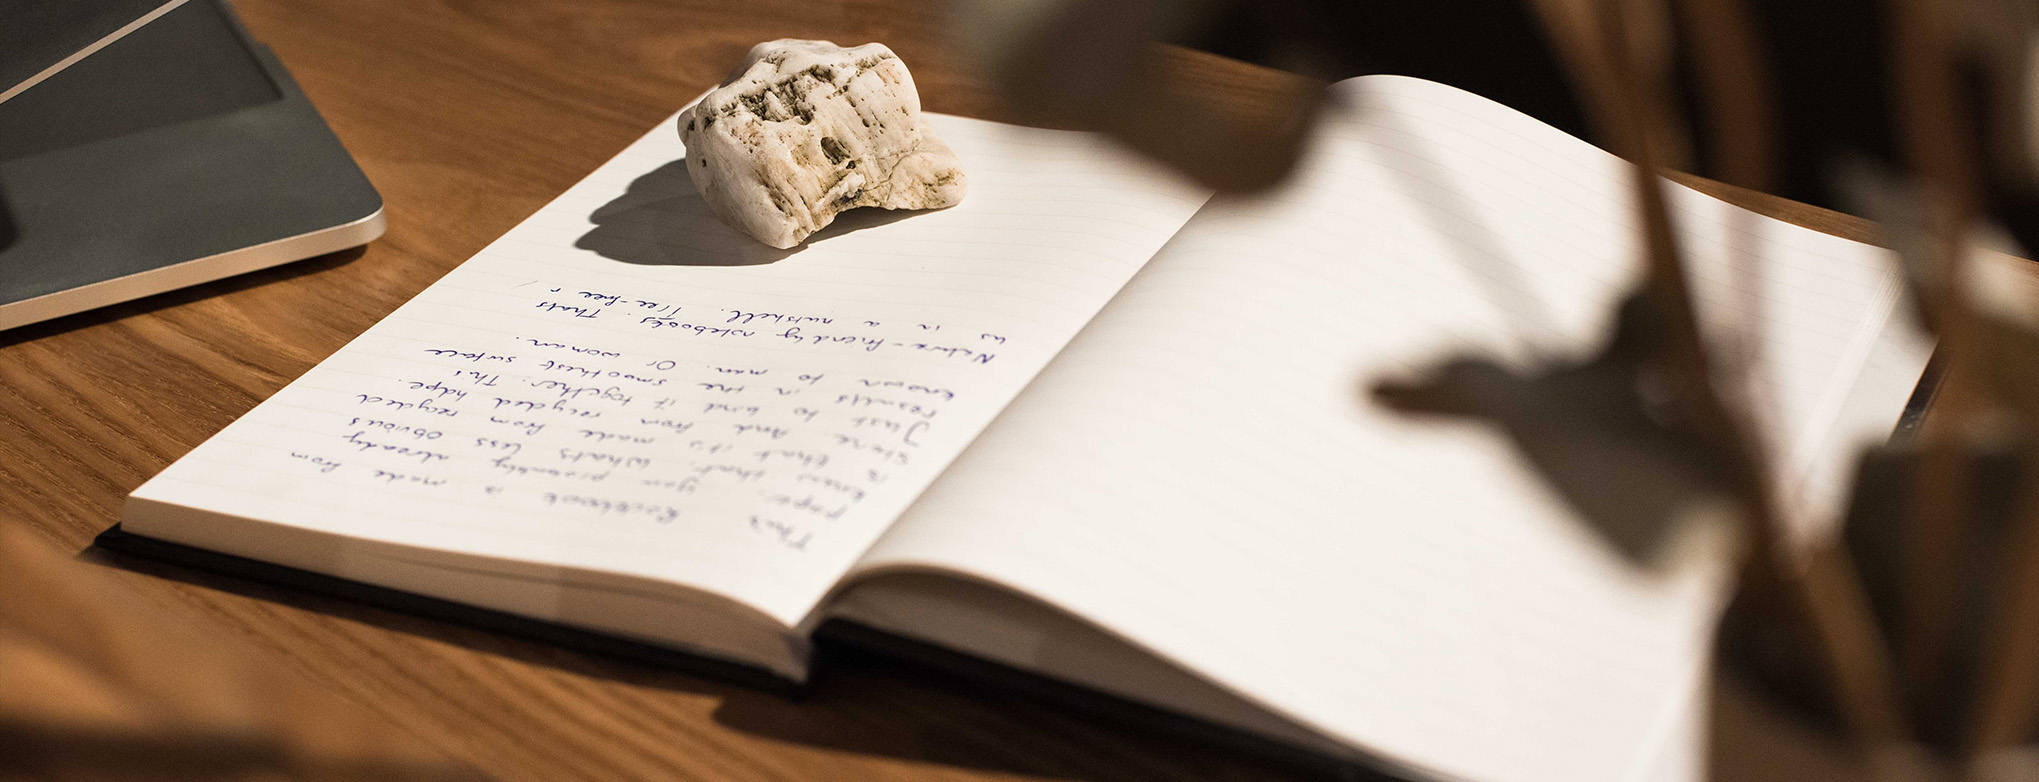 Stone paper notebook - Paper / on the Rocks